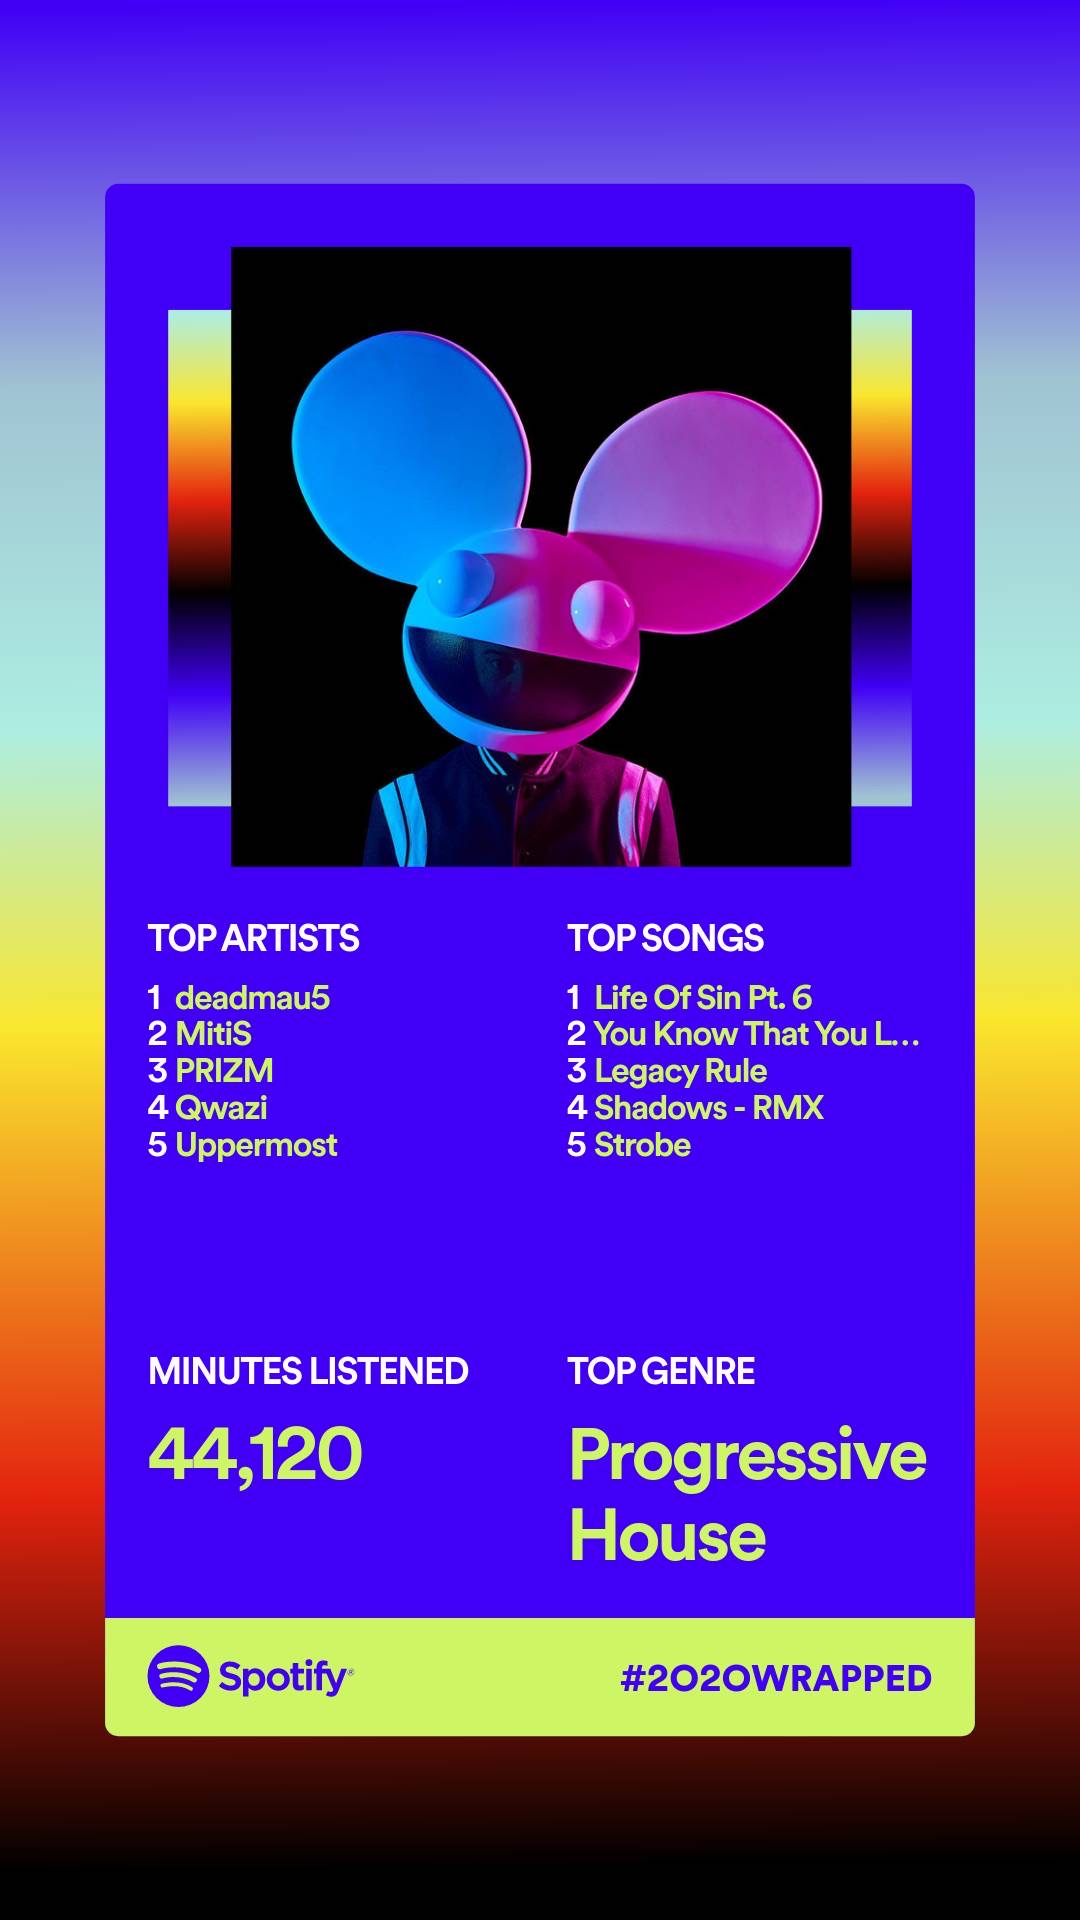 My 2020 Wrapped on Spotify